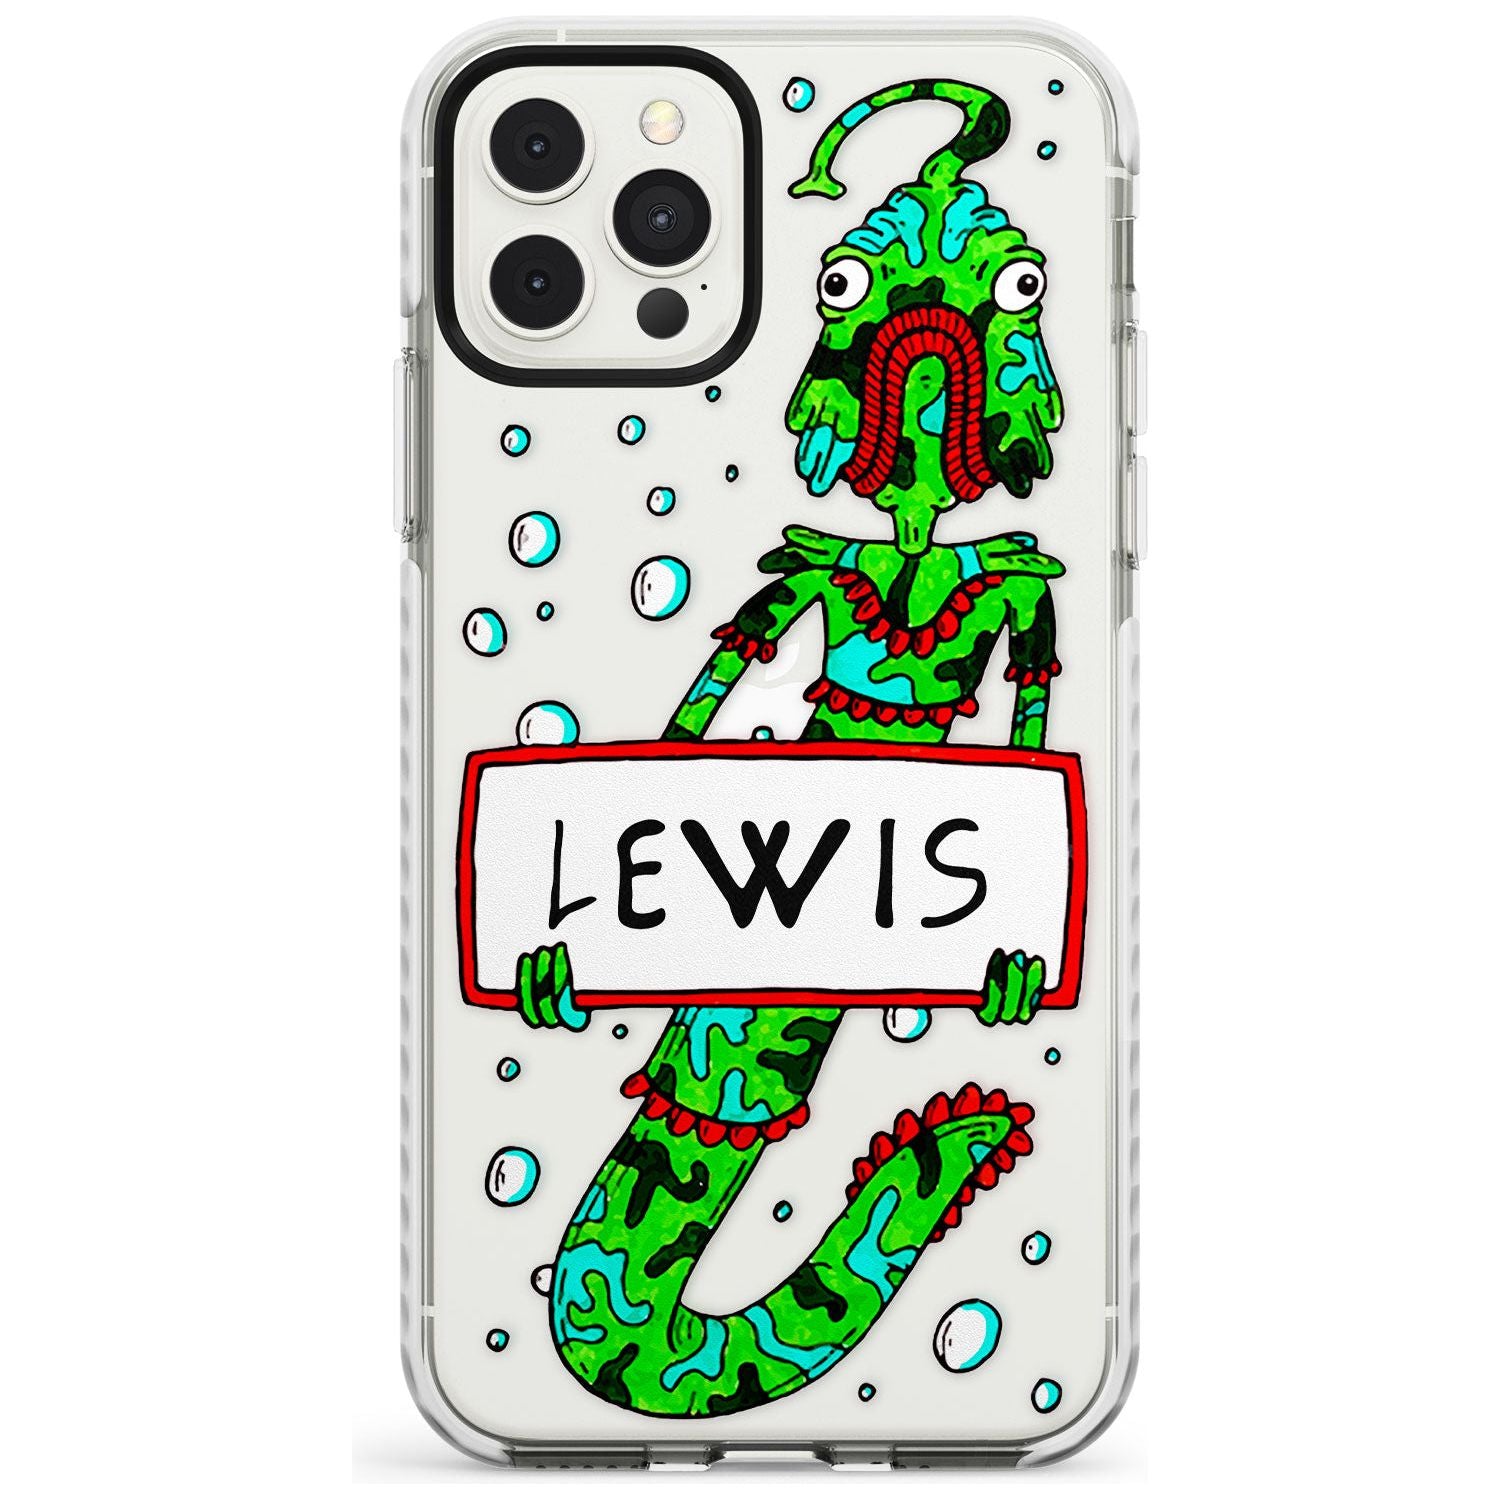 Personalised Custom Fish Boy Impact Phone Case for iPhone 11 Pro Max